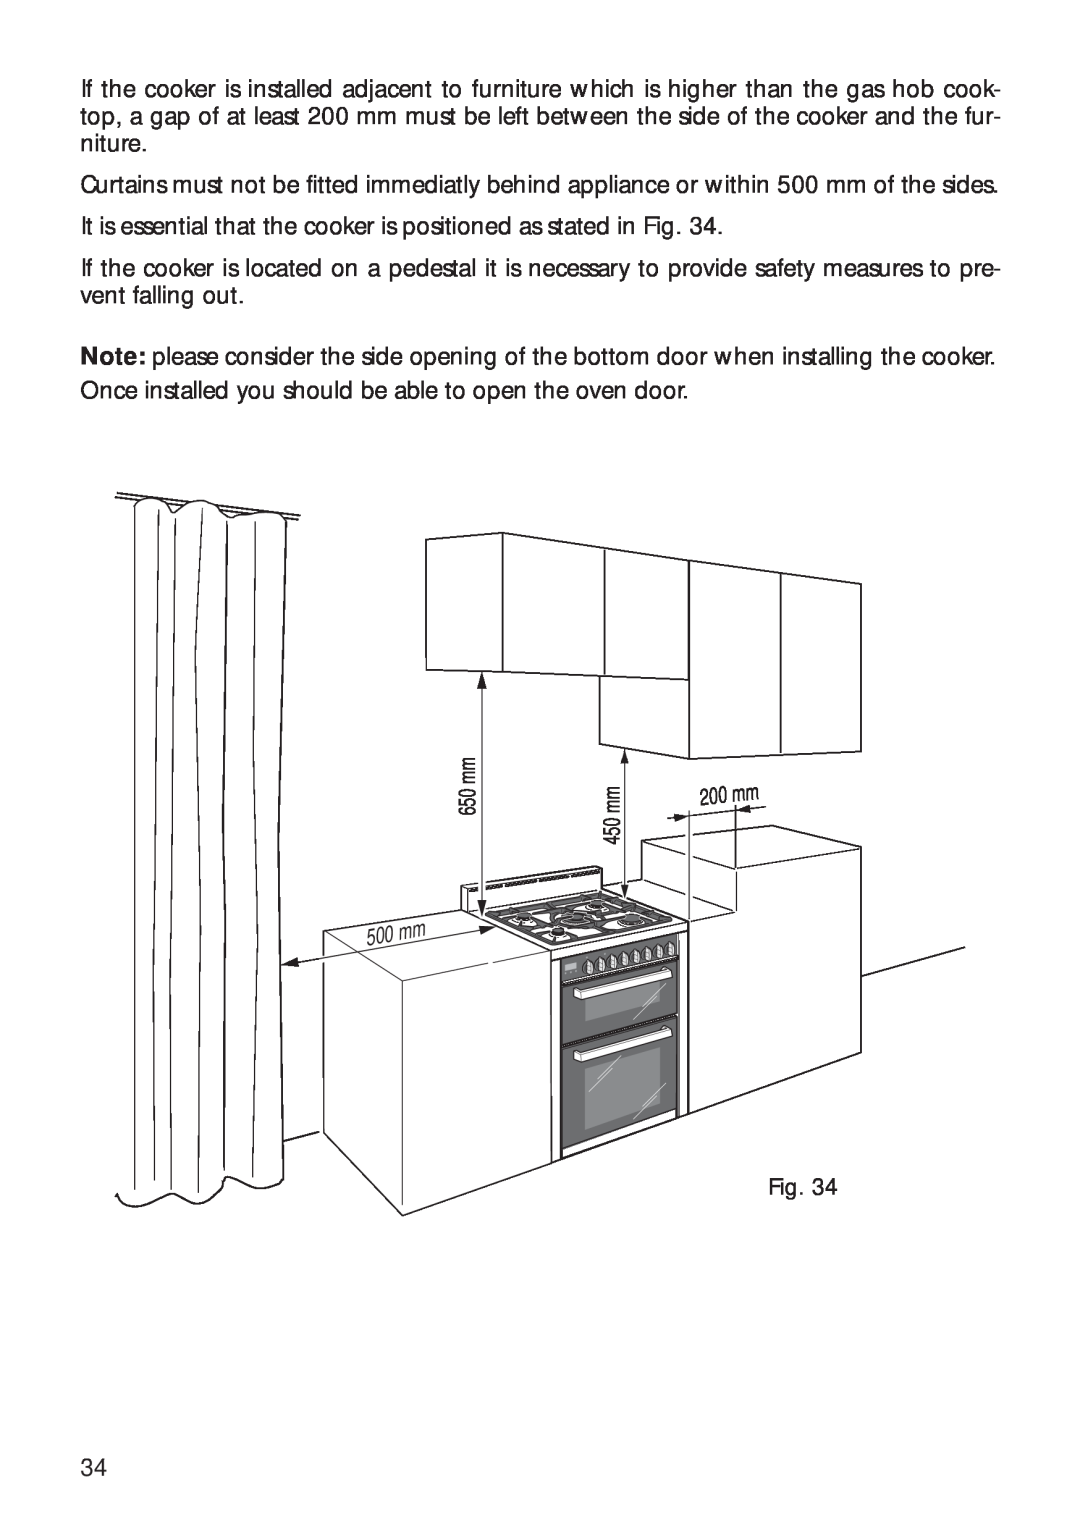 CDA RV 700 installation instructions It is essential that the cooker is positioned as stated in Fig 